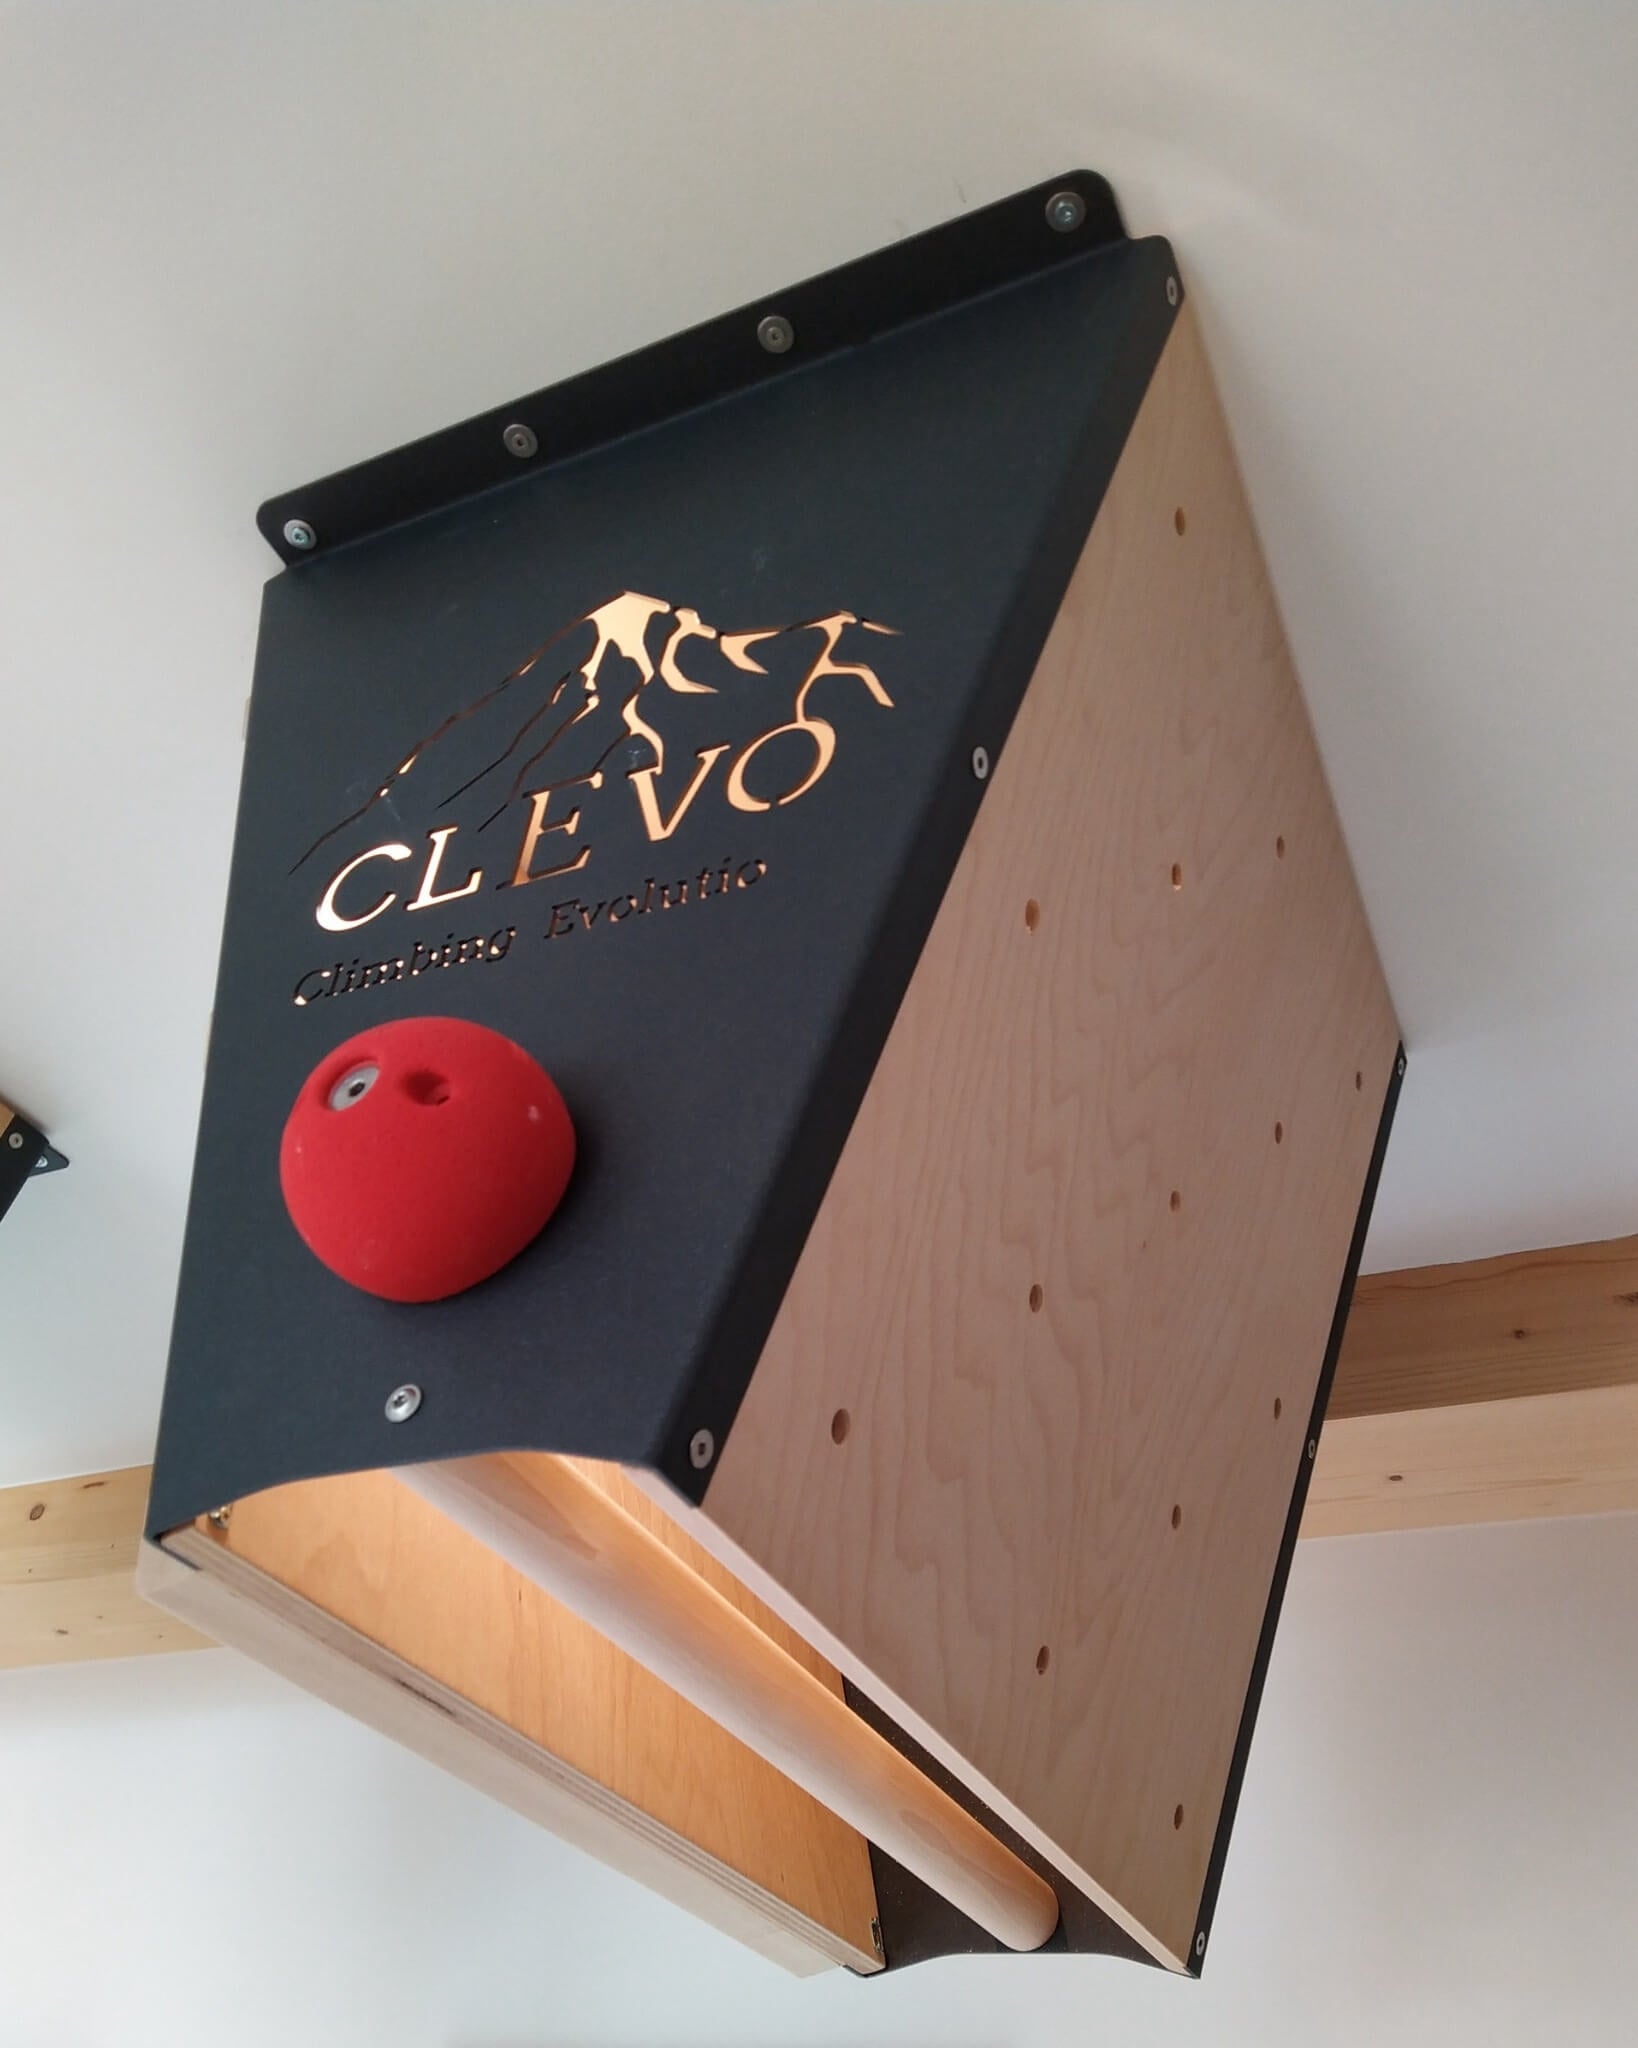 CLEVO L: Ceiling mount campus board, climbing handles and pull-up bar